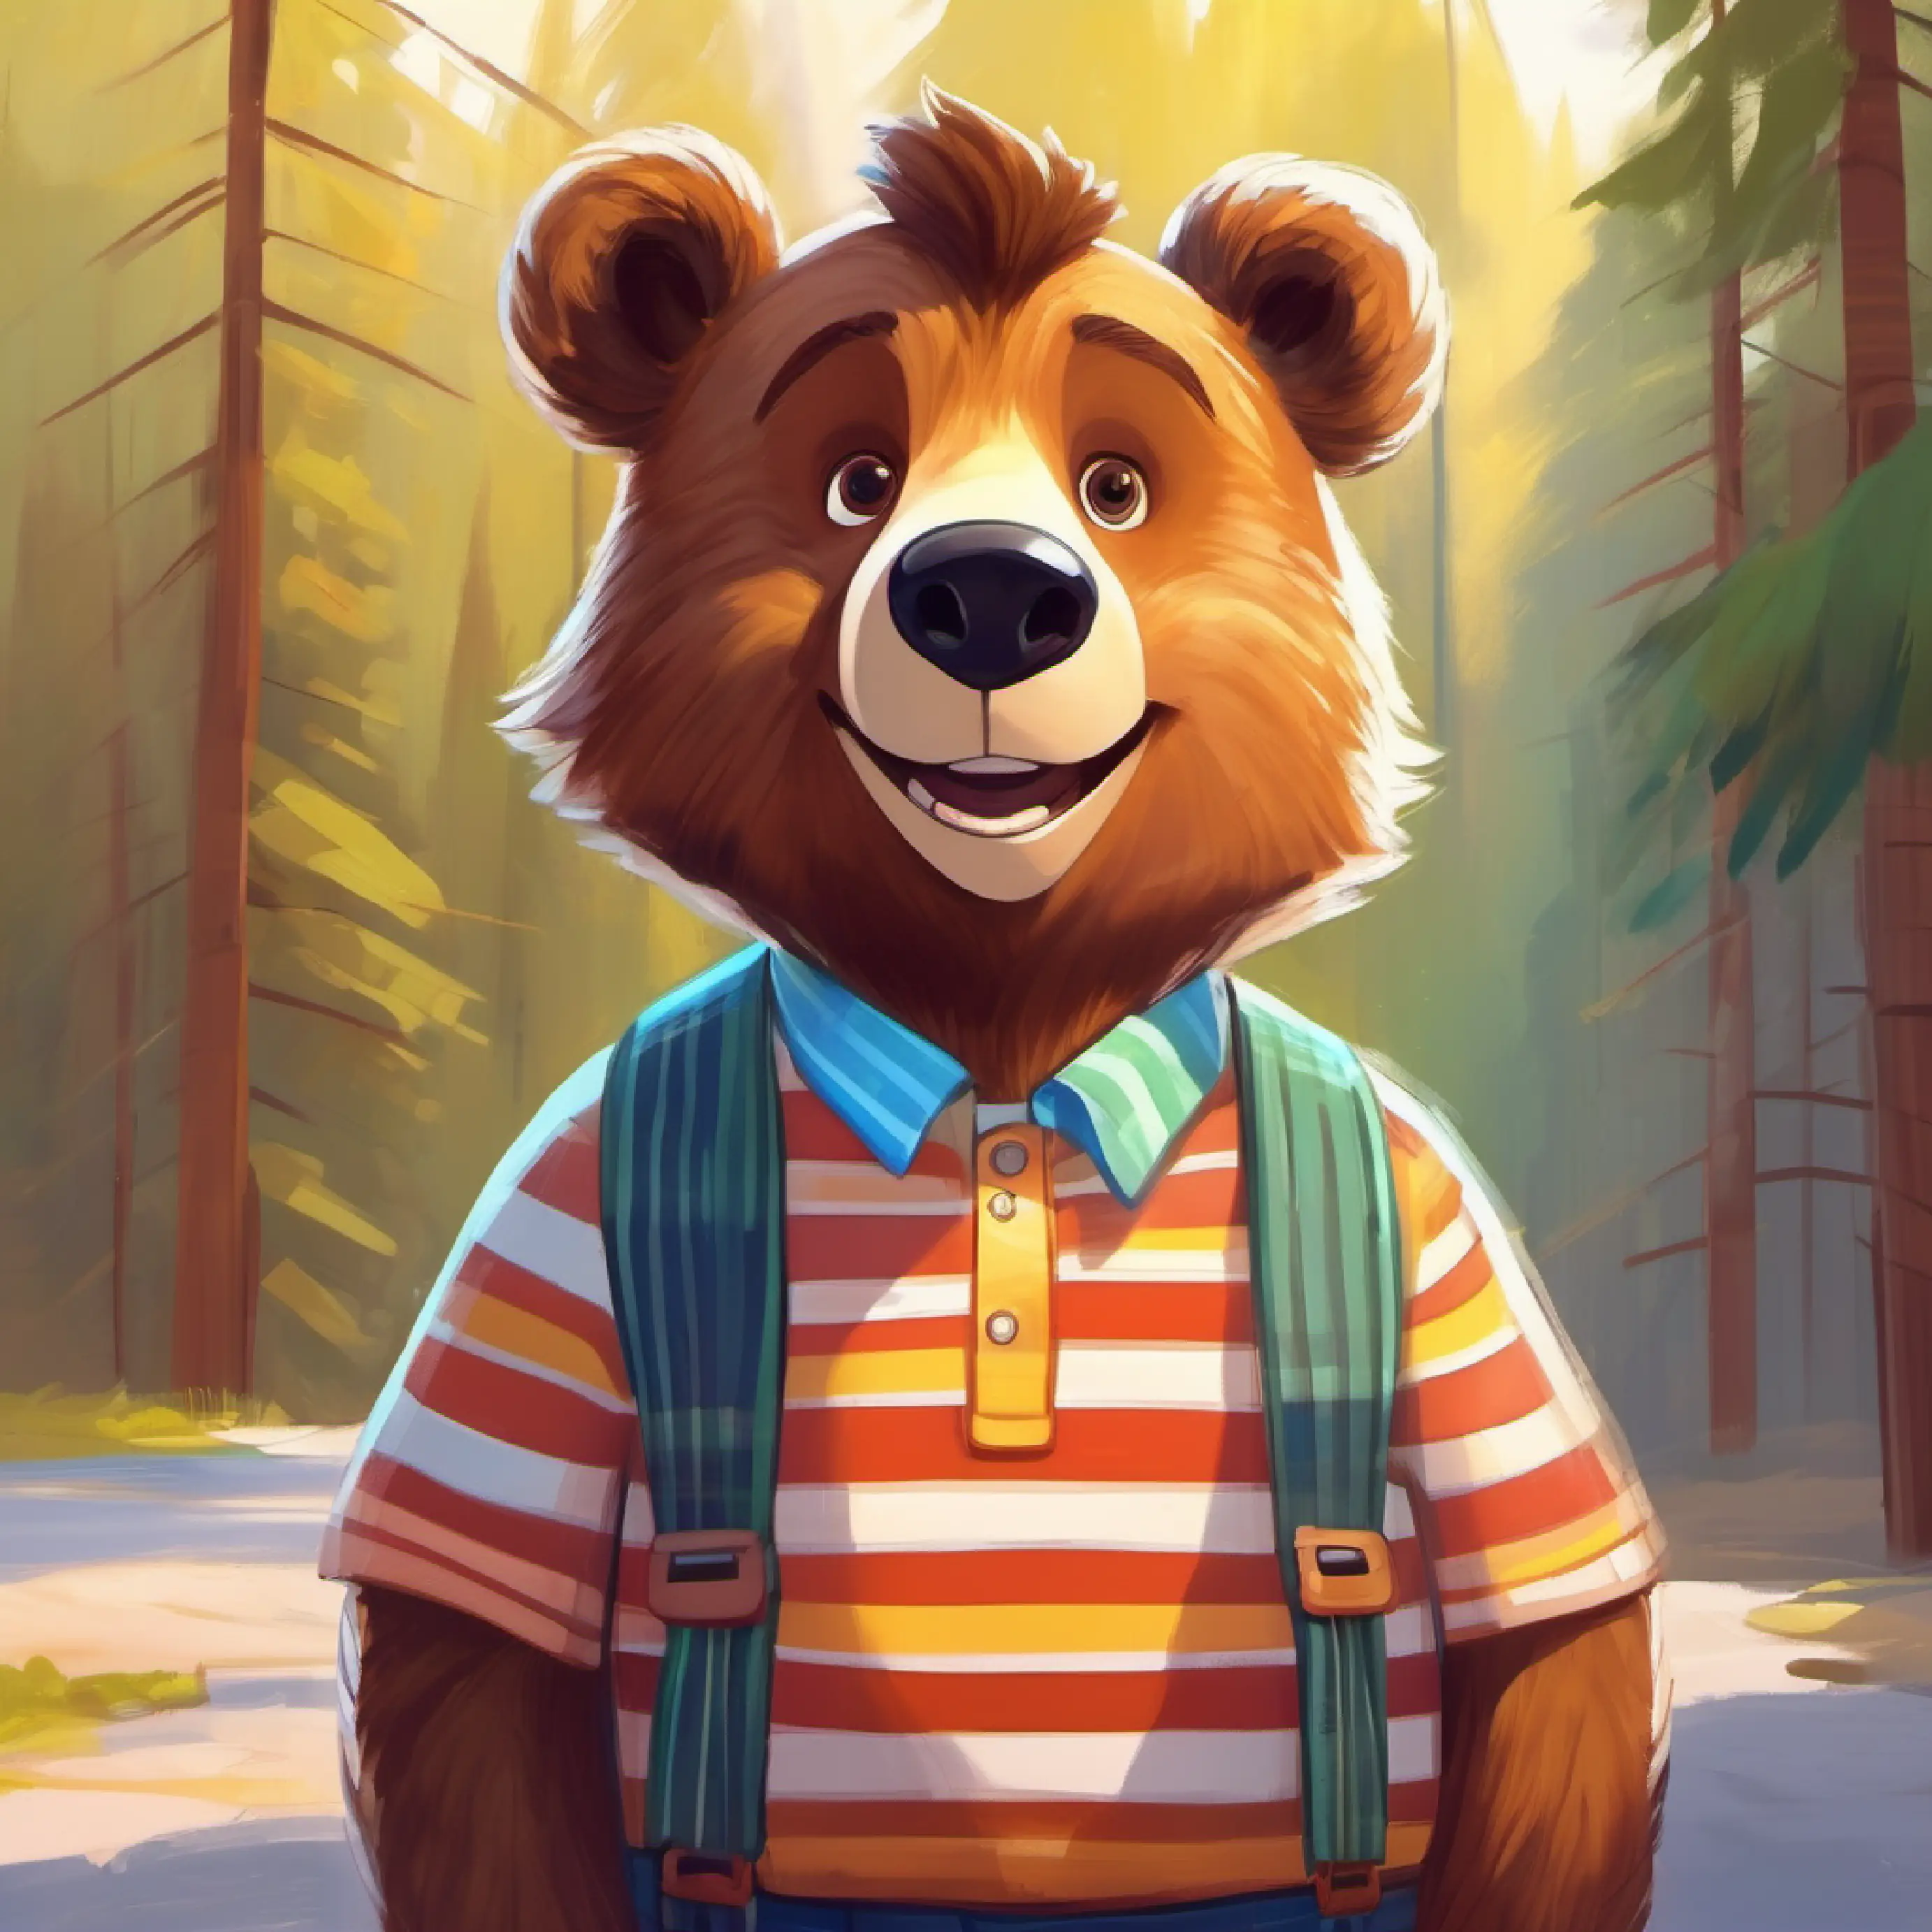 Brown bear with a bright smile and a striped shirt, brown eyes's nervousness and outfit for the first day.